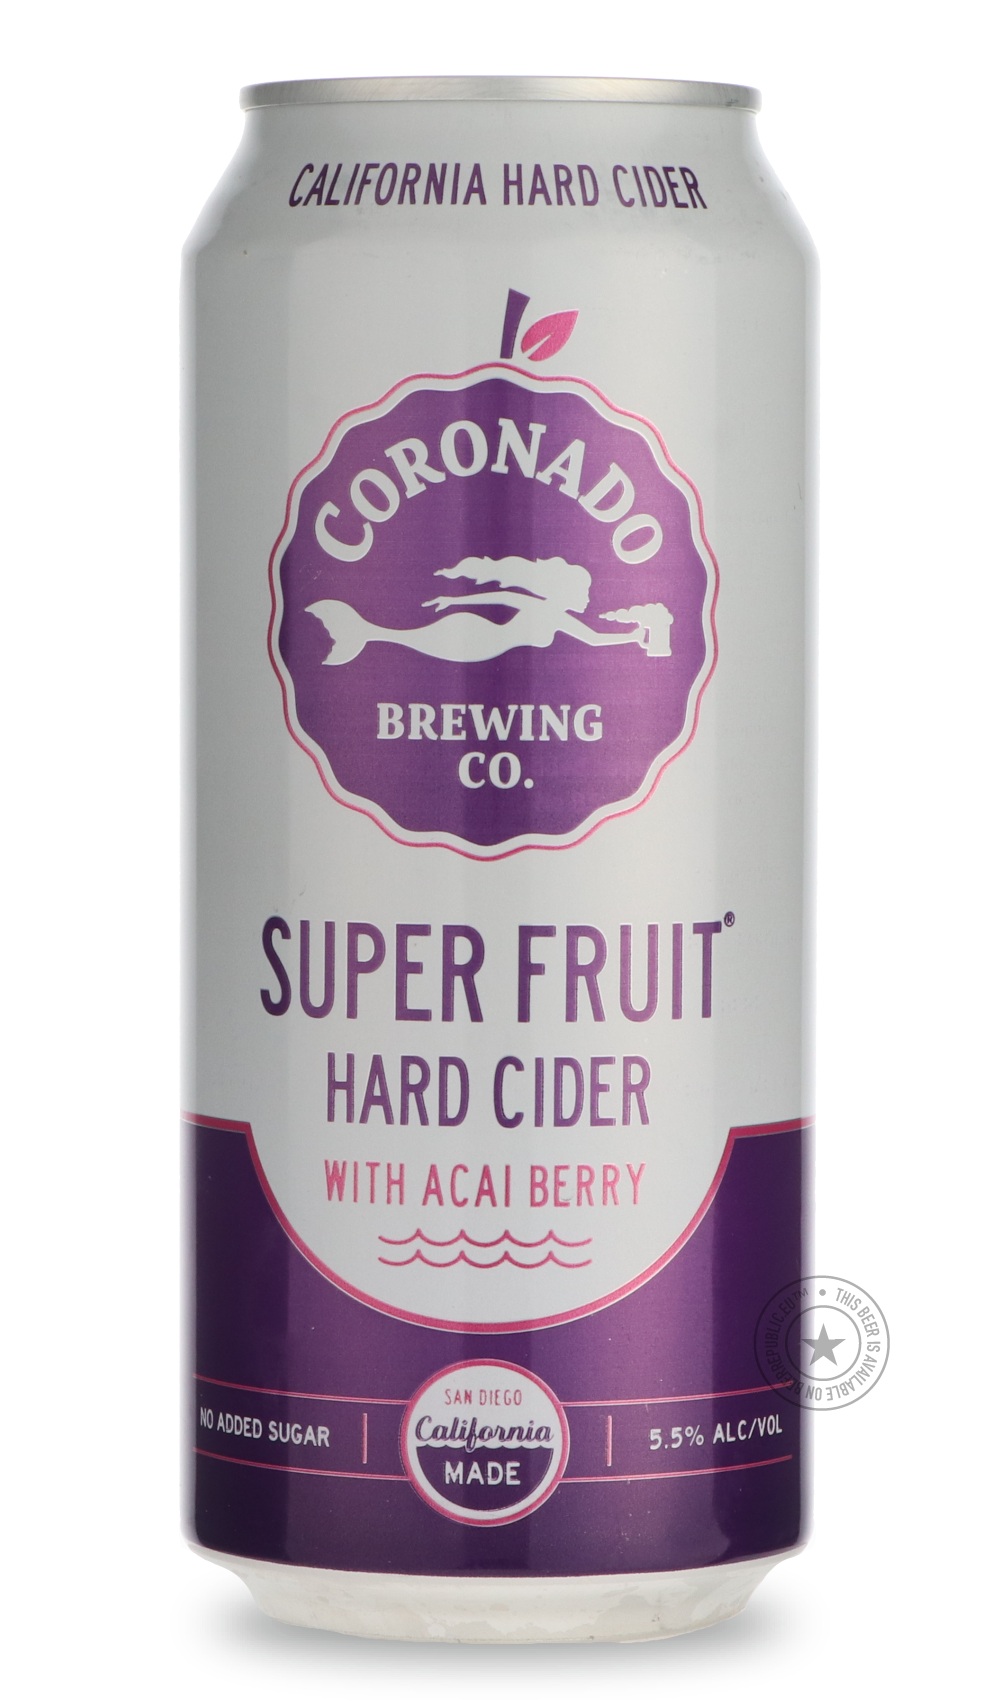 -Coronado- Super Fruit-Specials- Only @ Beer Republic - The best online beer store for American & Canadian craft beer - Buy beer online from the USA and Canada - Bier online kopen - Amerikaans bier kopen - Craft beer store - Craft beer kopen - Amerikanisch bier kaufen - Bier online kaufen - Acheter biere online - IPA - Stout - Porter - New England IPA - Hazy IPA - Imperial Stout - Barrel Aged - Barrel Aged Imperial Stout - Brown - Dark beer - Blond - Blonde - Pilsner - Lager - Wheat - Weizen - Amber - Barle